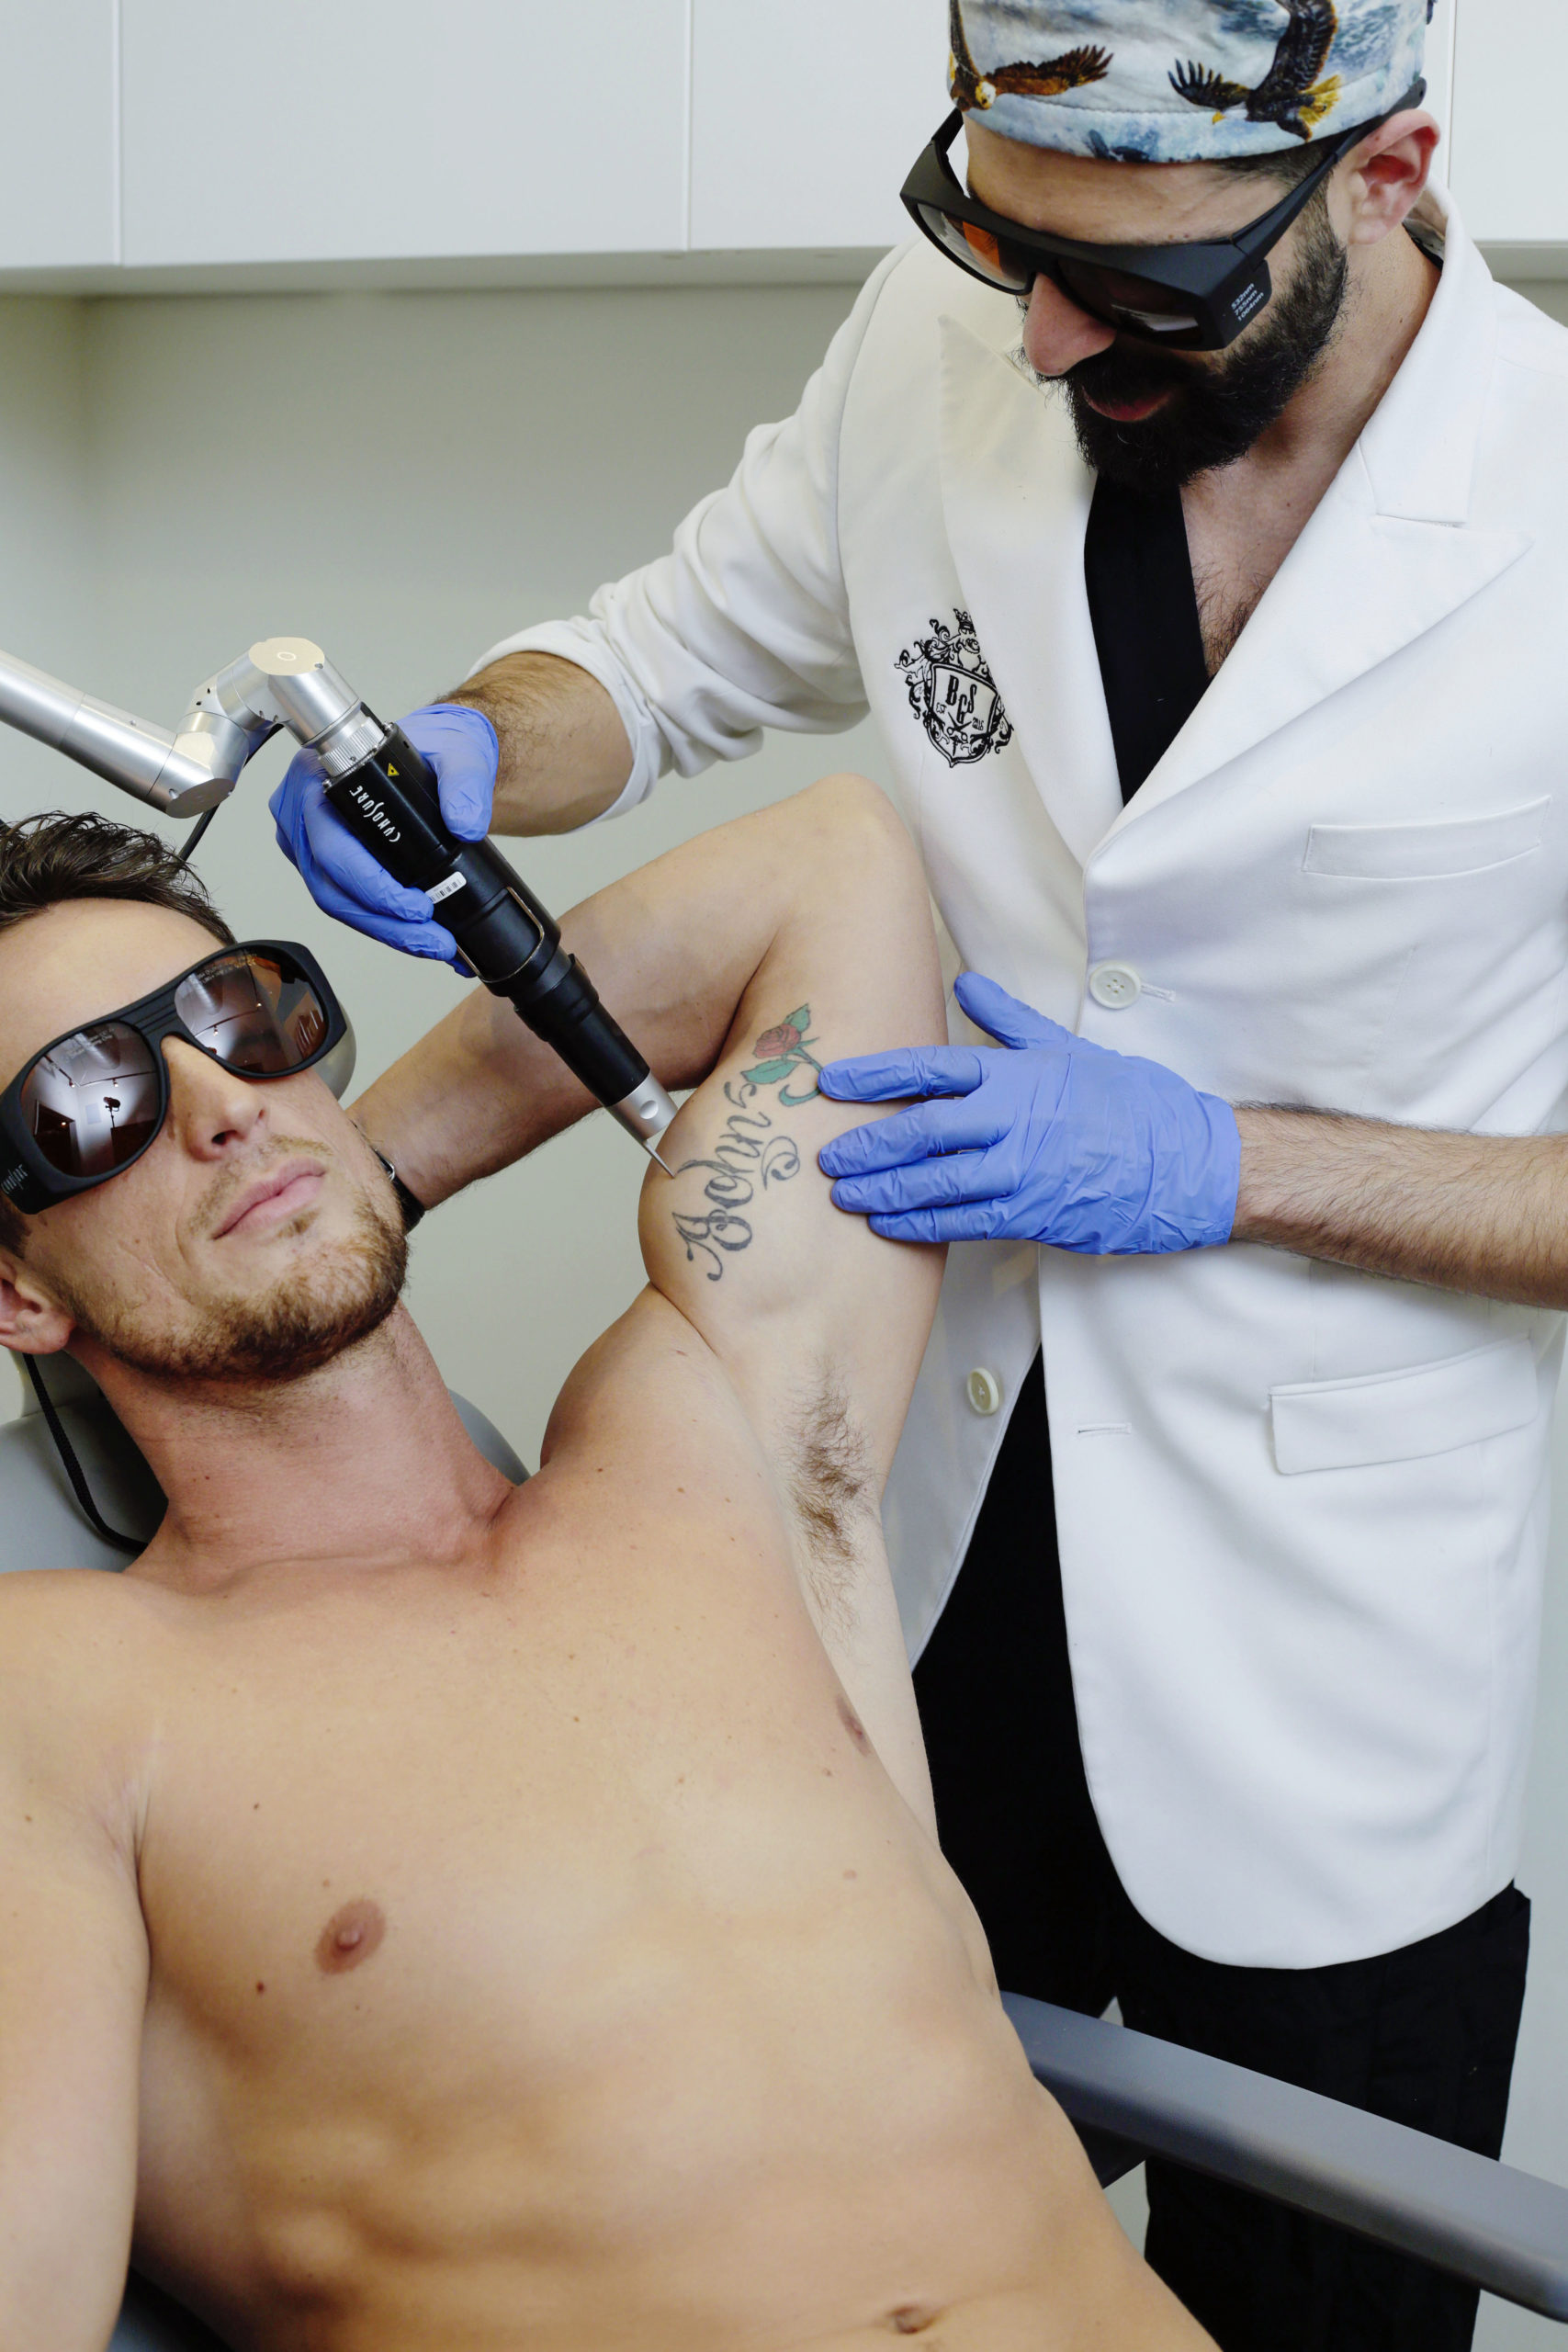 laser tattoo removal